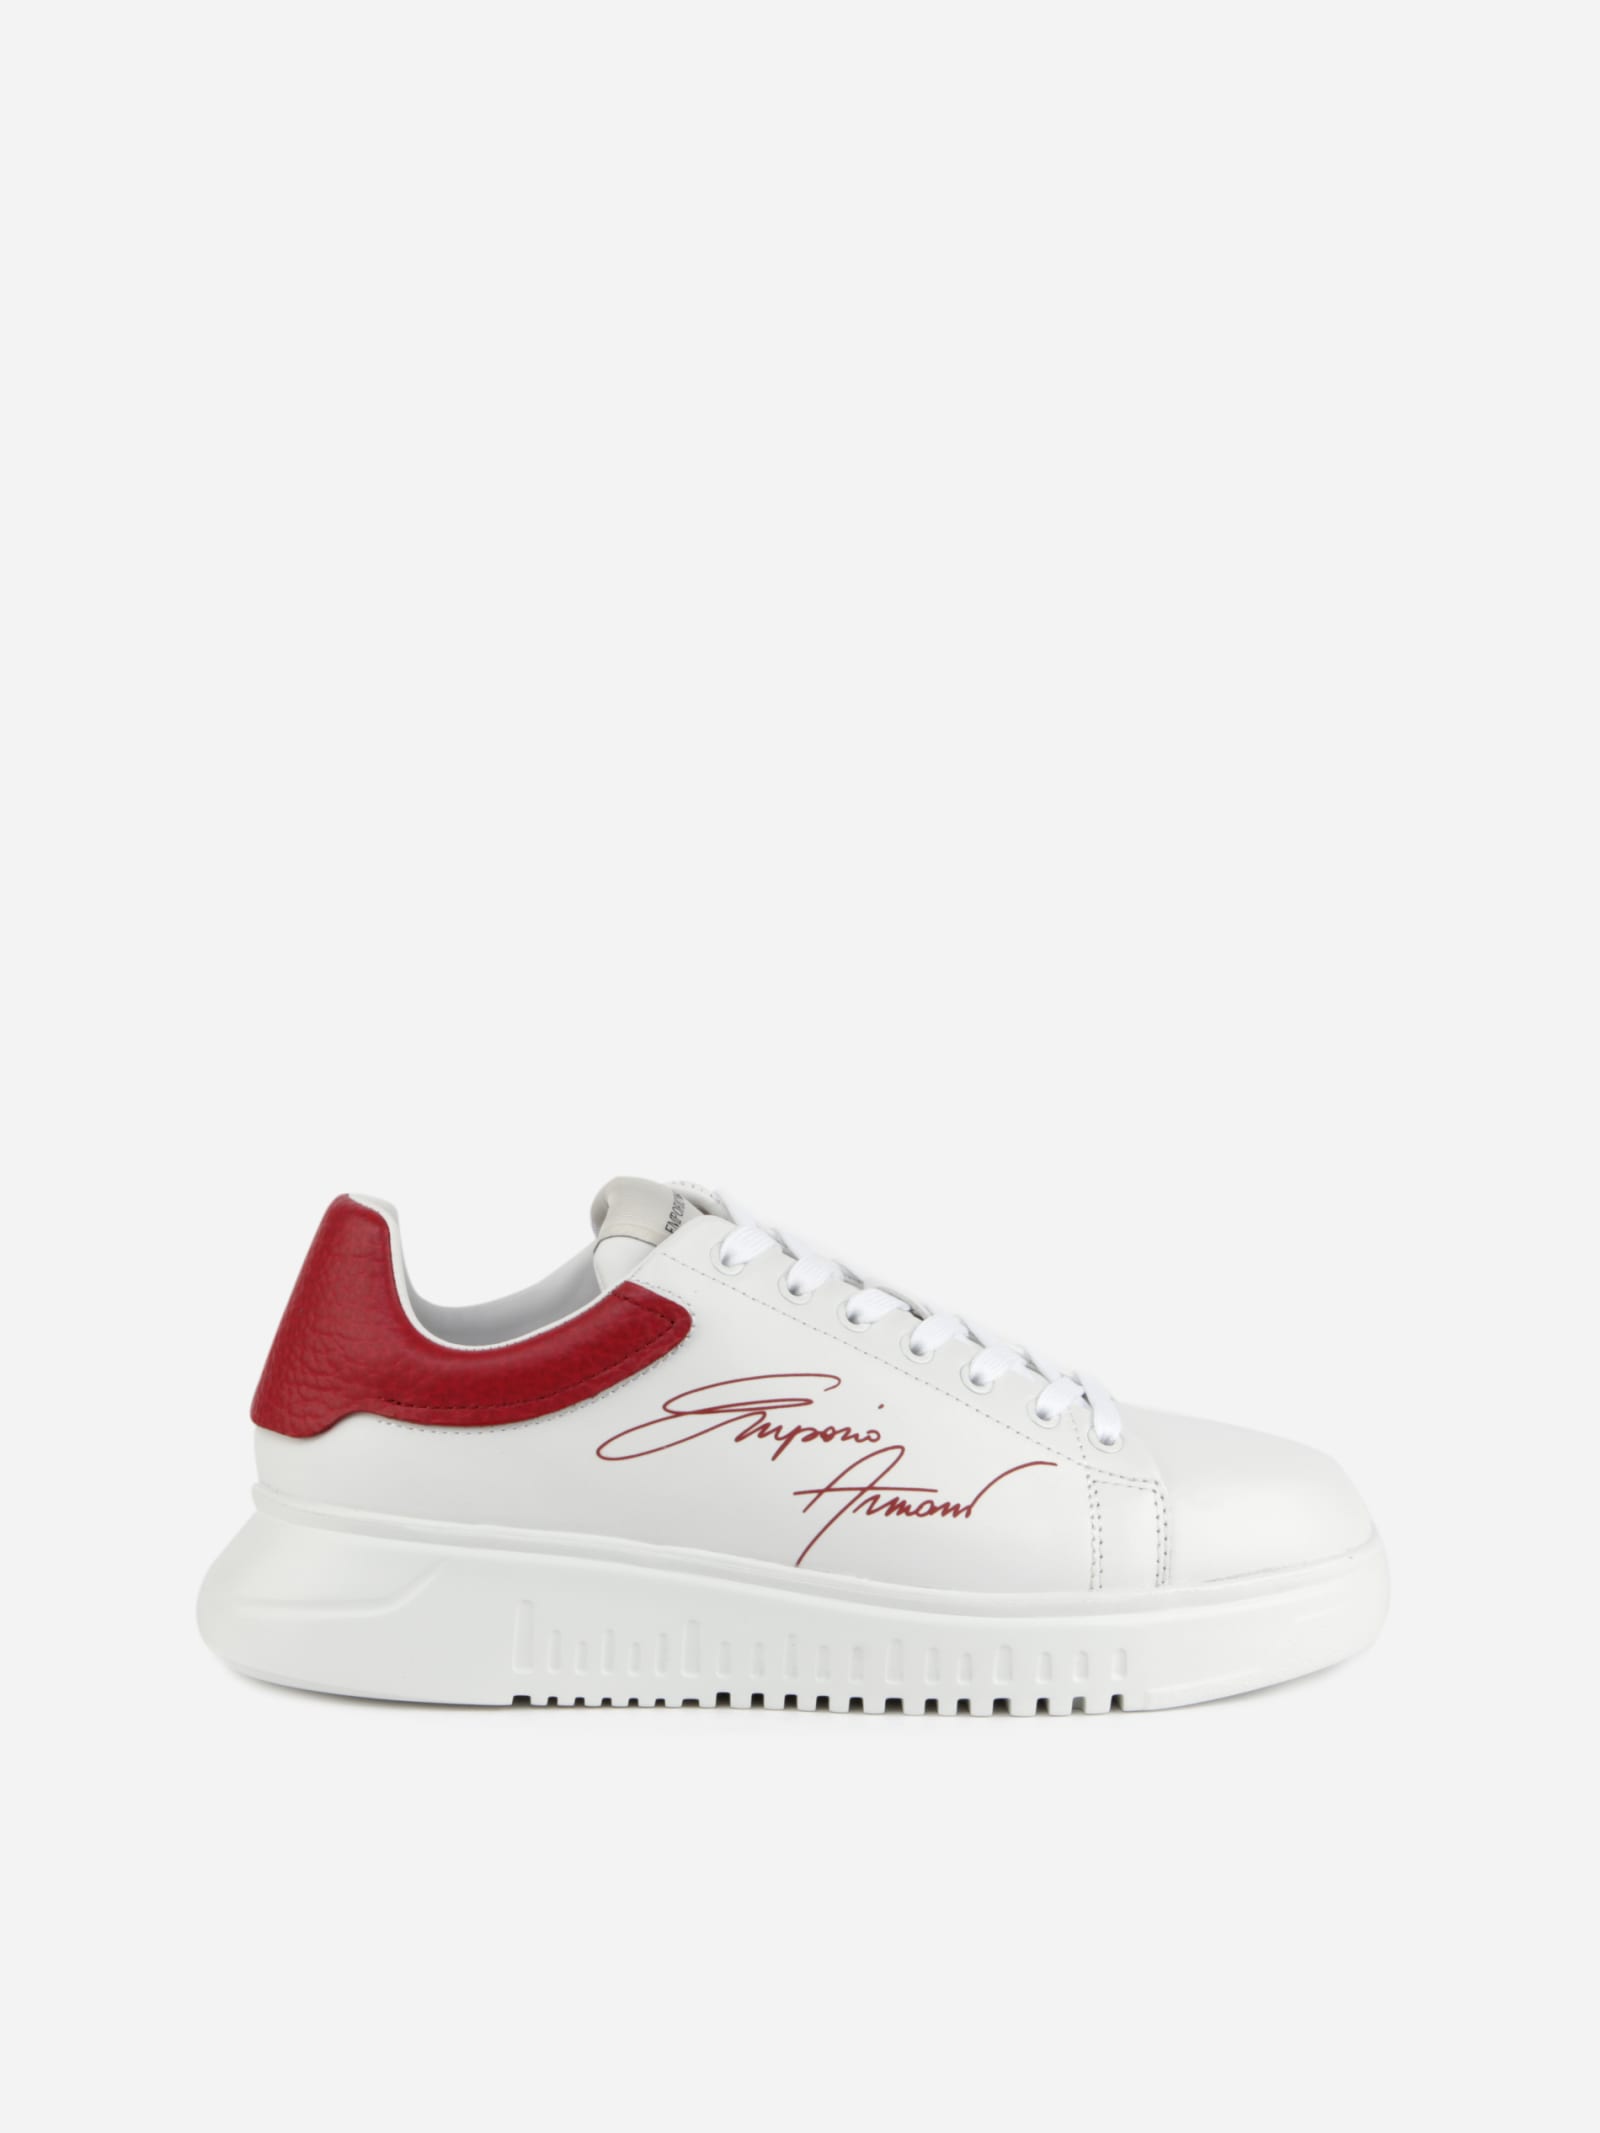 Emporio Armani Leather Sneakers With Contrasting Signature Detail